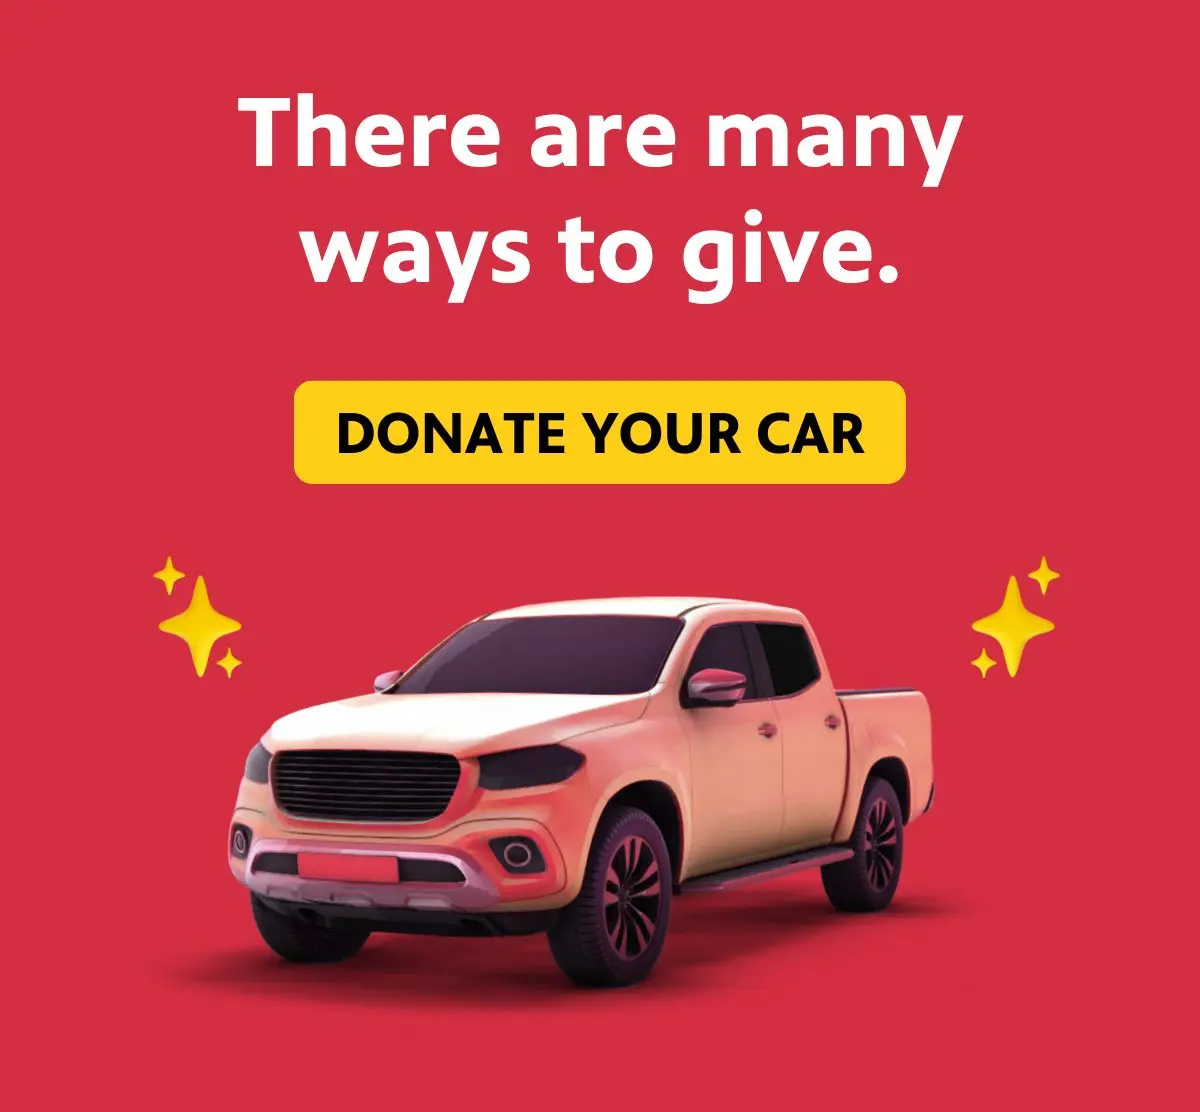 There are many ways to give. Donate your car